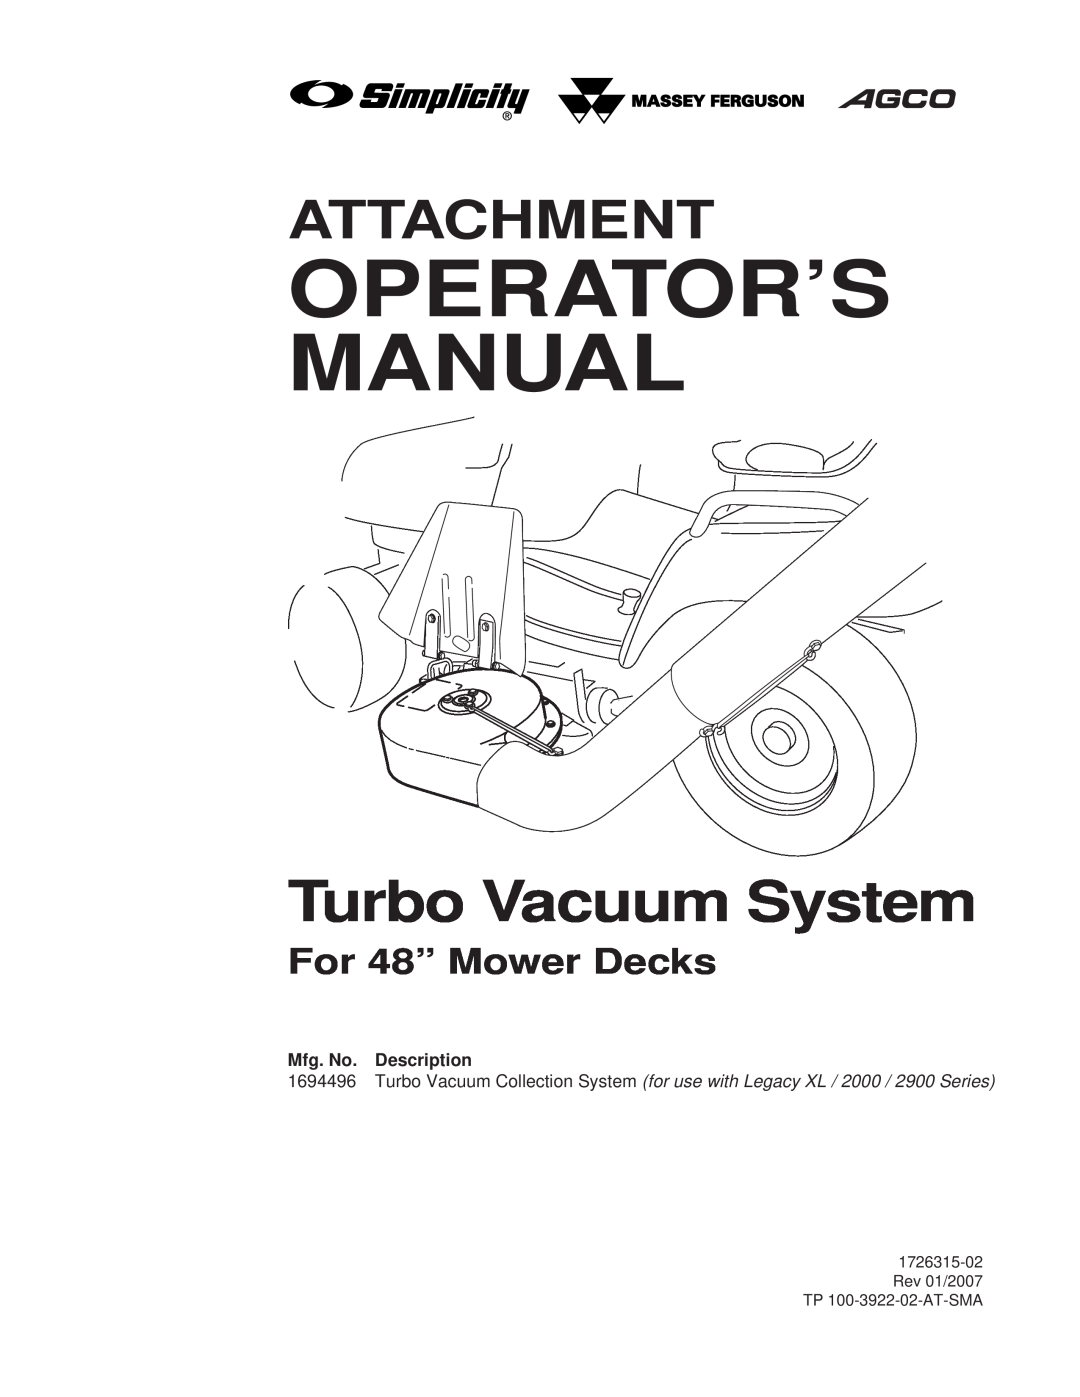 Snapper 1726315-02, 1694496 manual Operator’S Manual, Turbo Vacuum System, Attachment, For 48” Mower Decks 